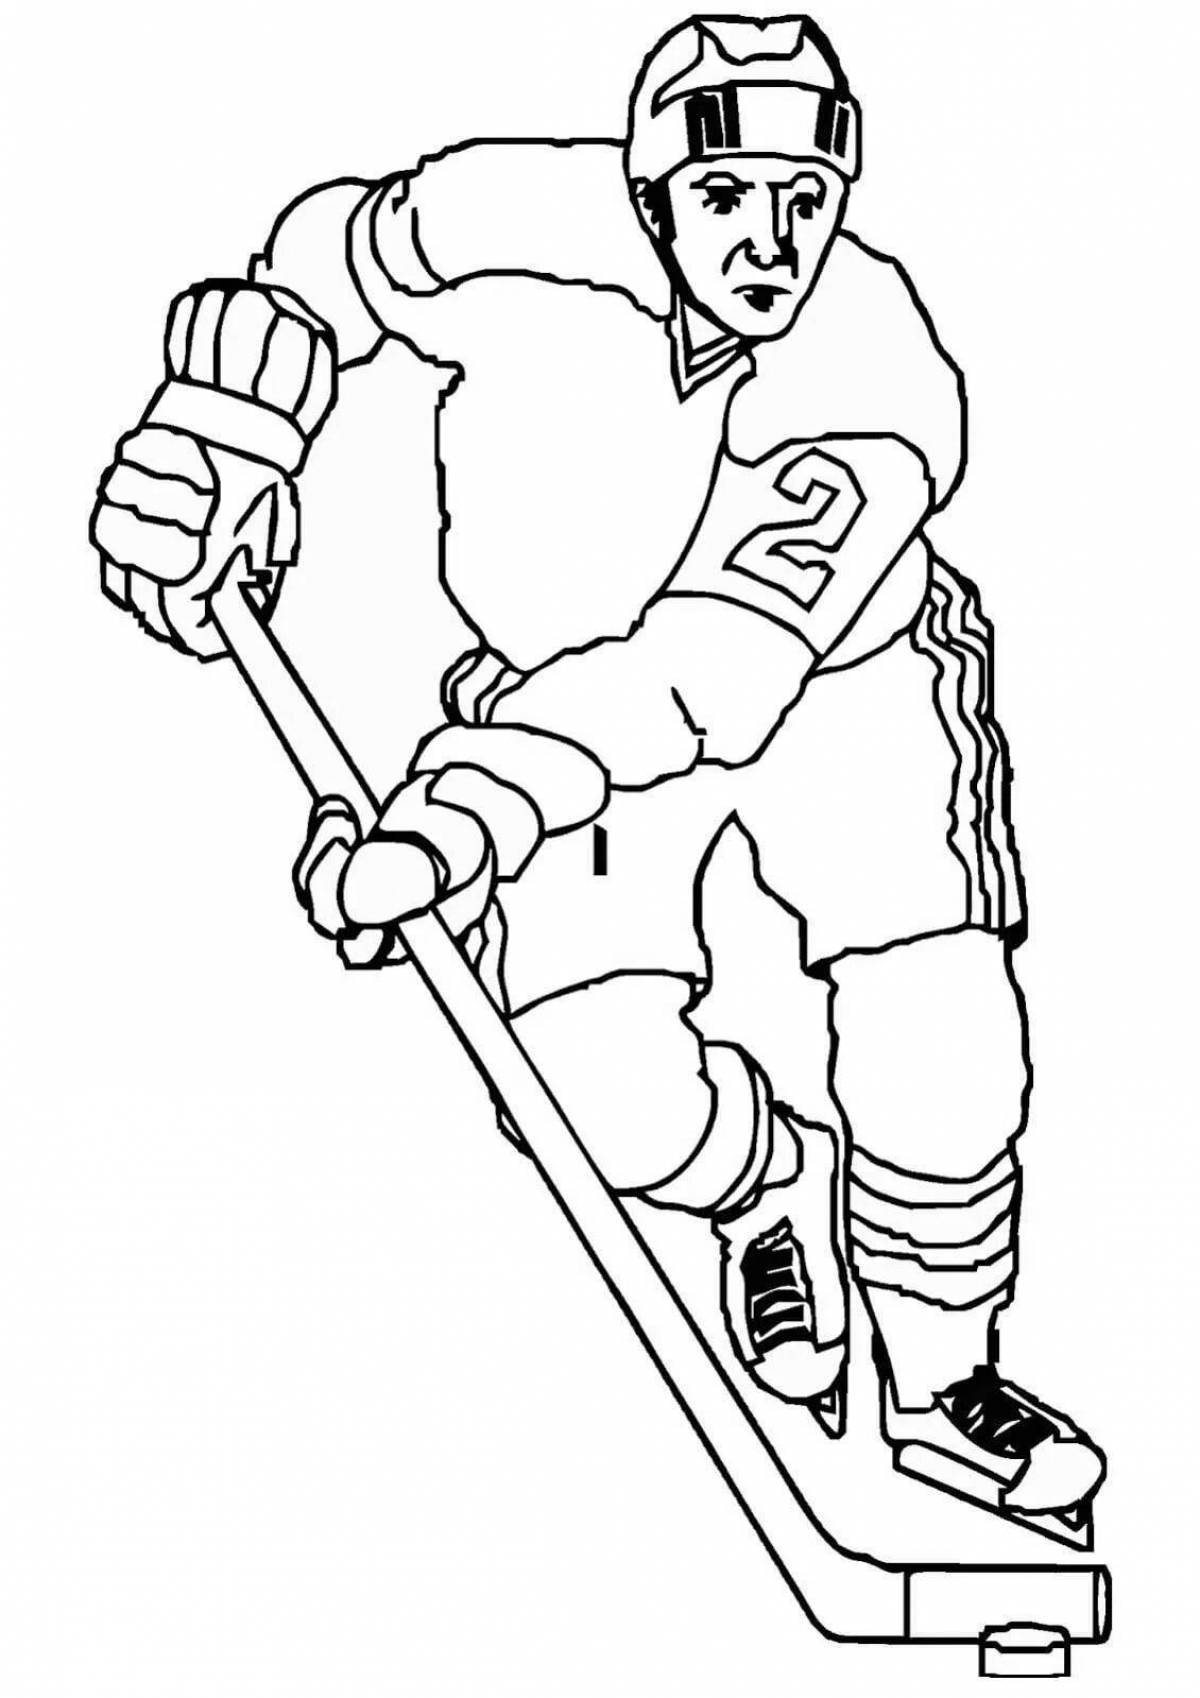 Glorious hockey coloring page